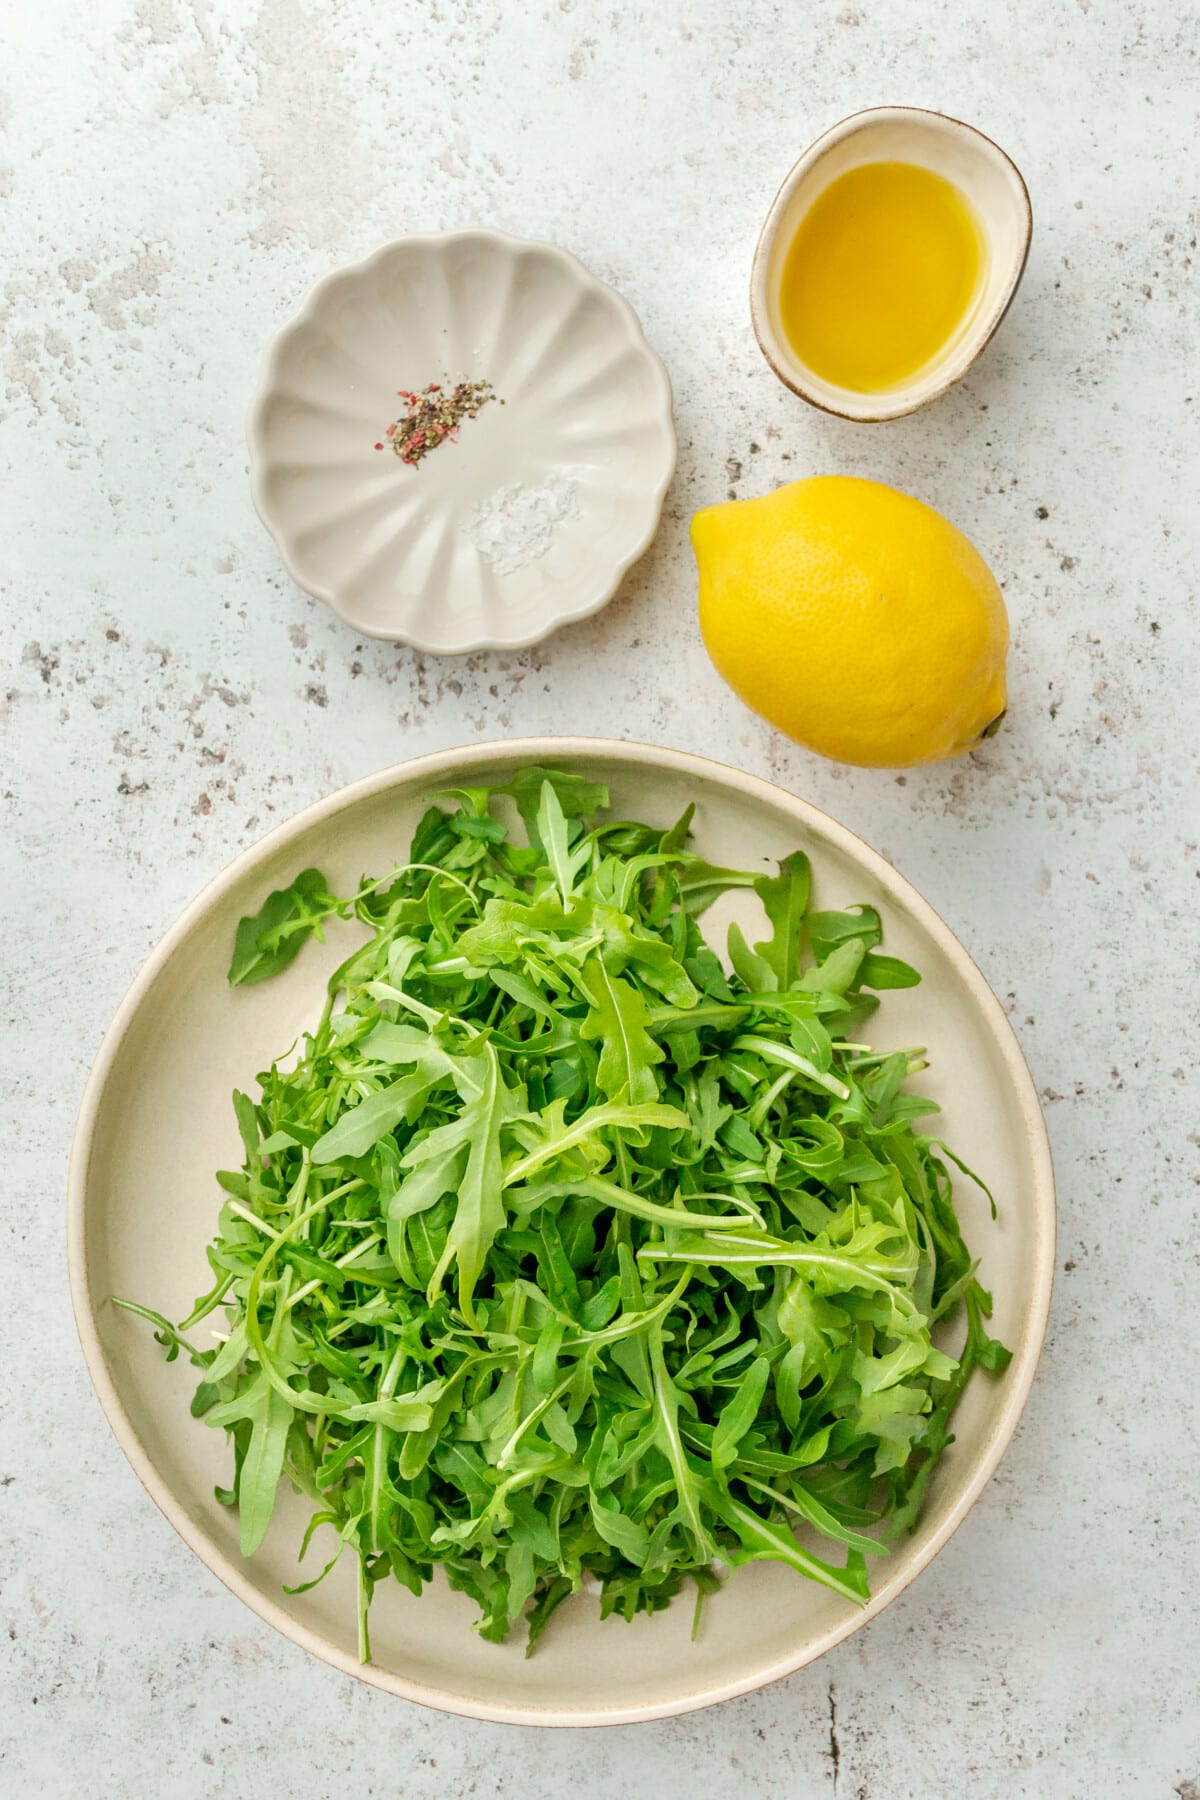 Ingredients for arugula salad sit in a variety of plates on a light grey surface.